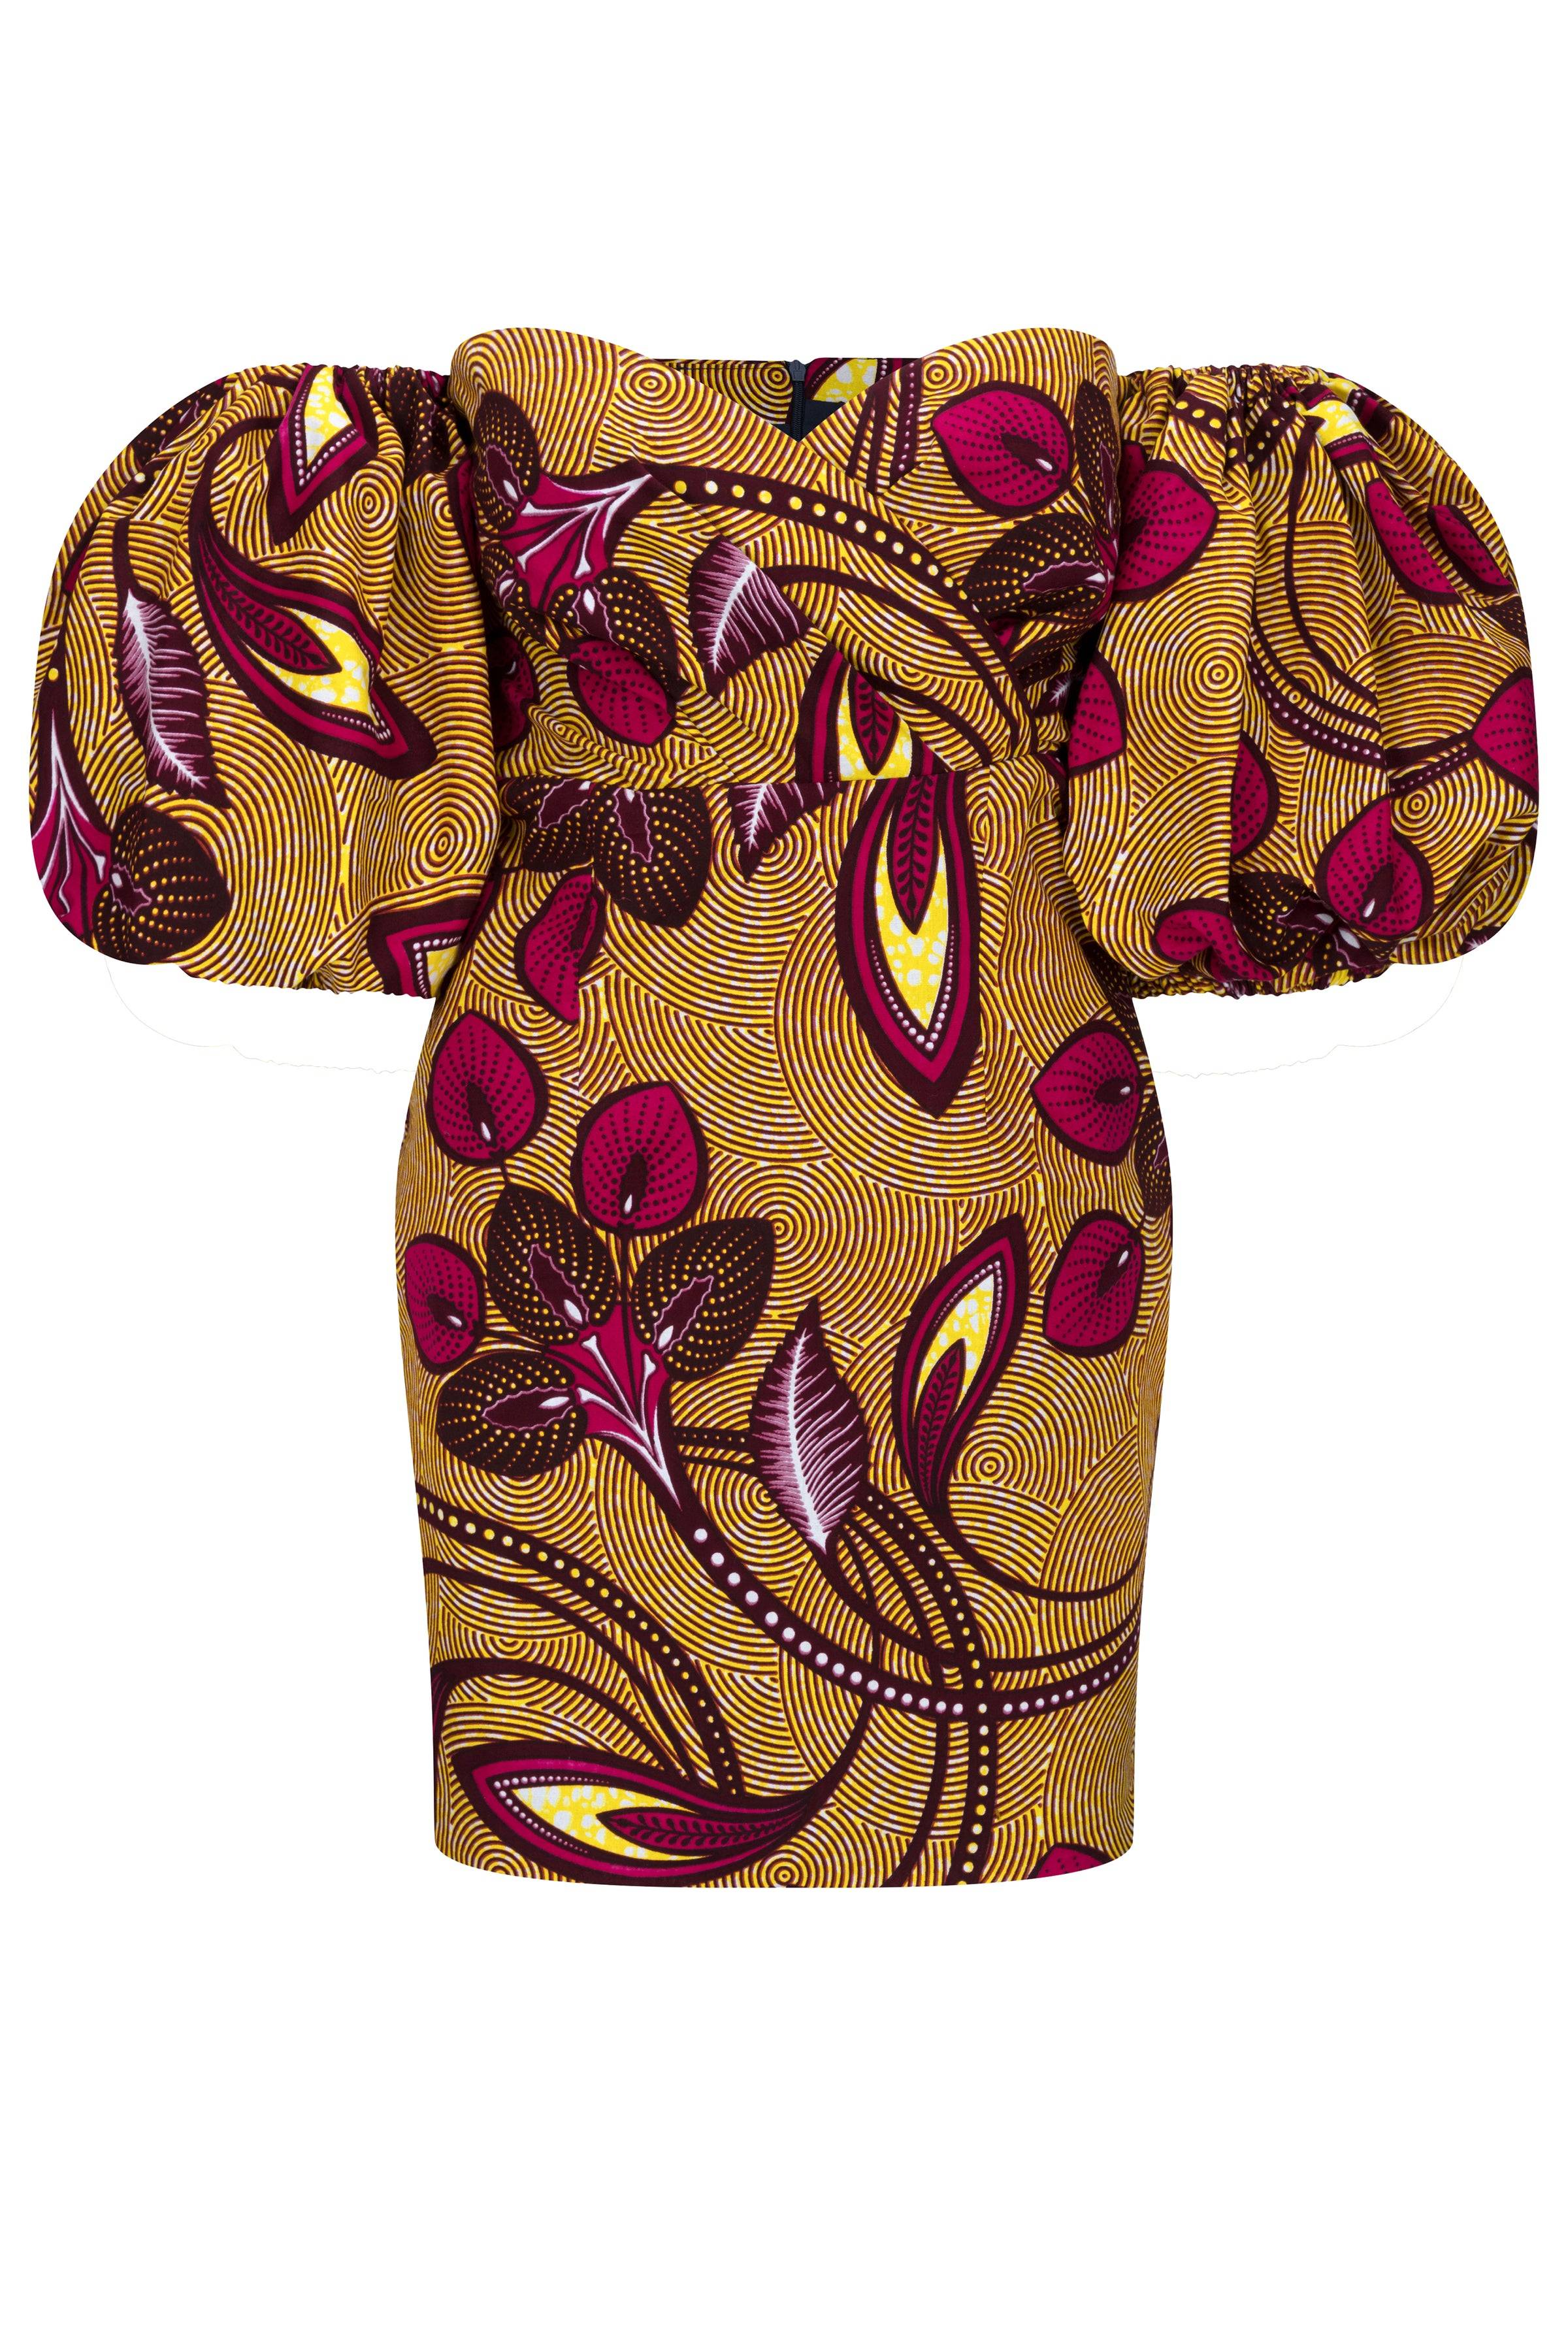 LADIES SIZE GUIDE – OHEMA OHENE AFRICAN INSPIRED FASHION